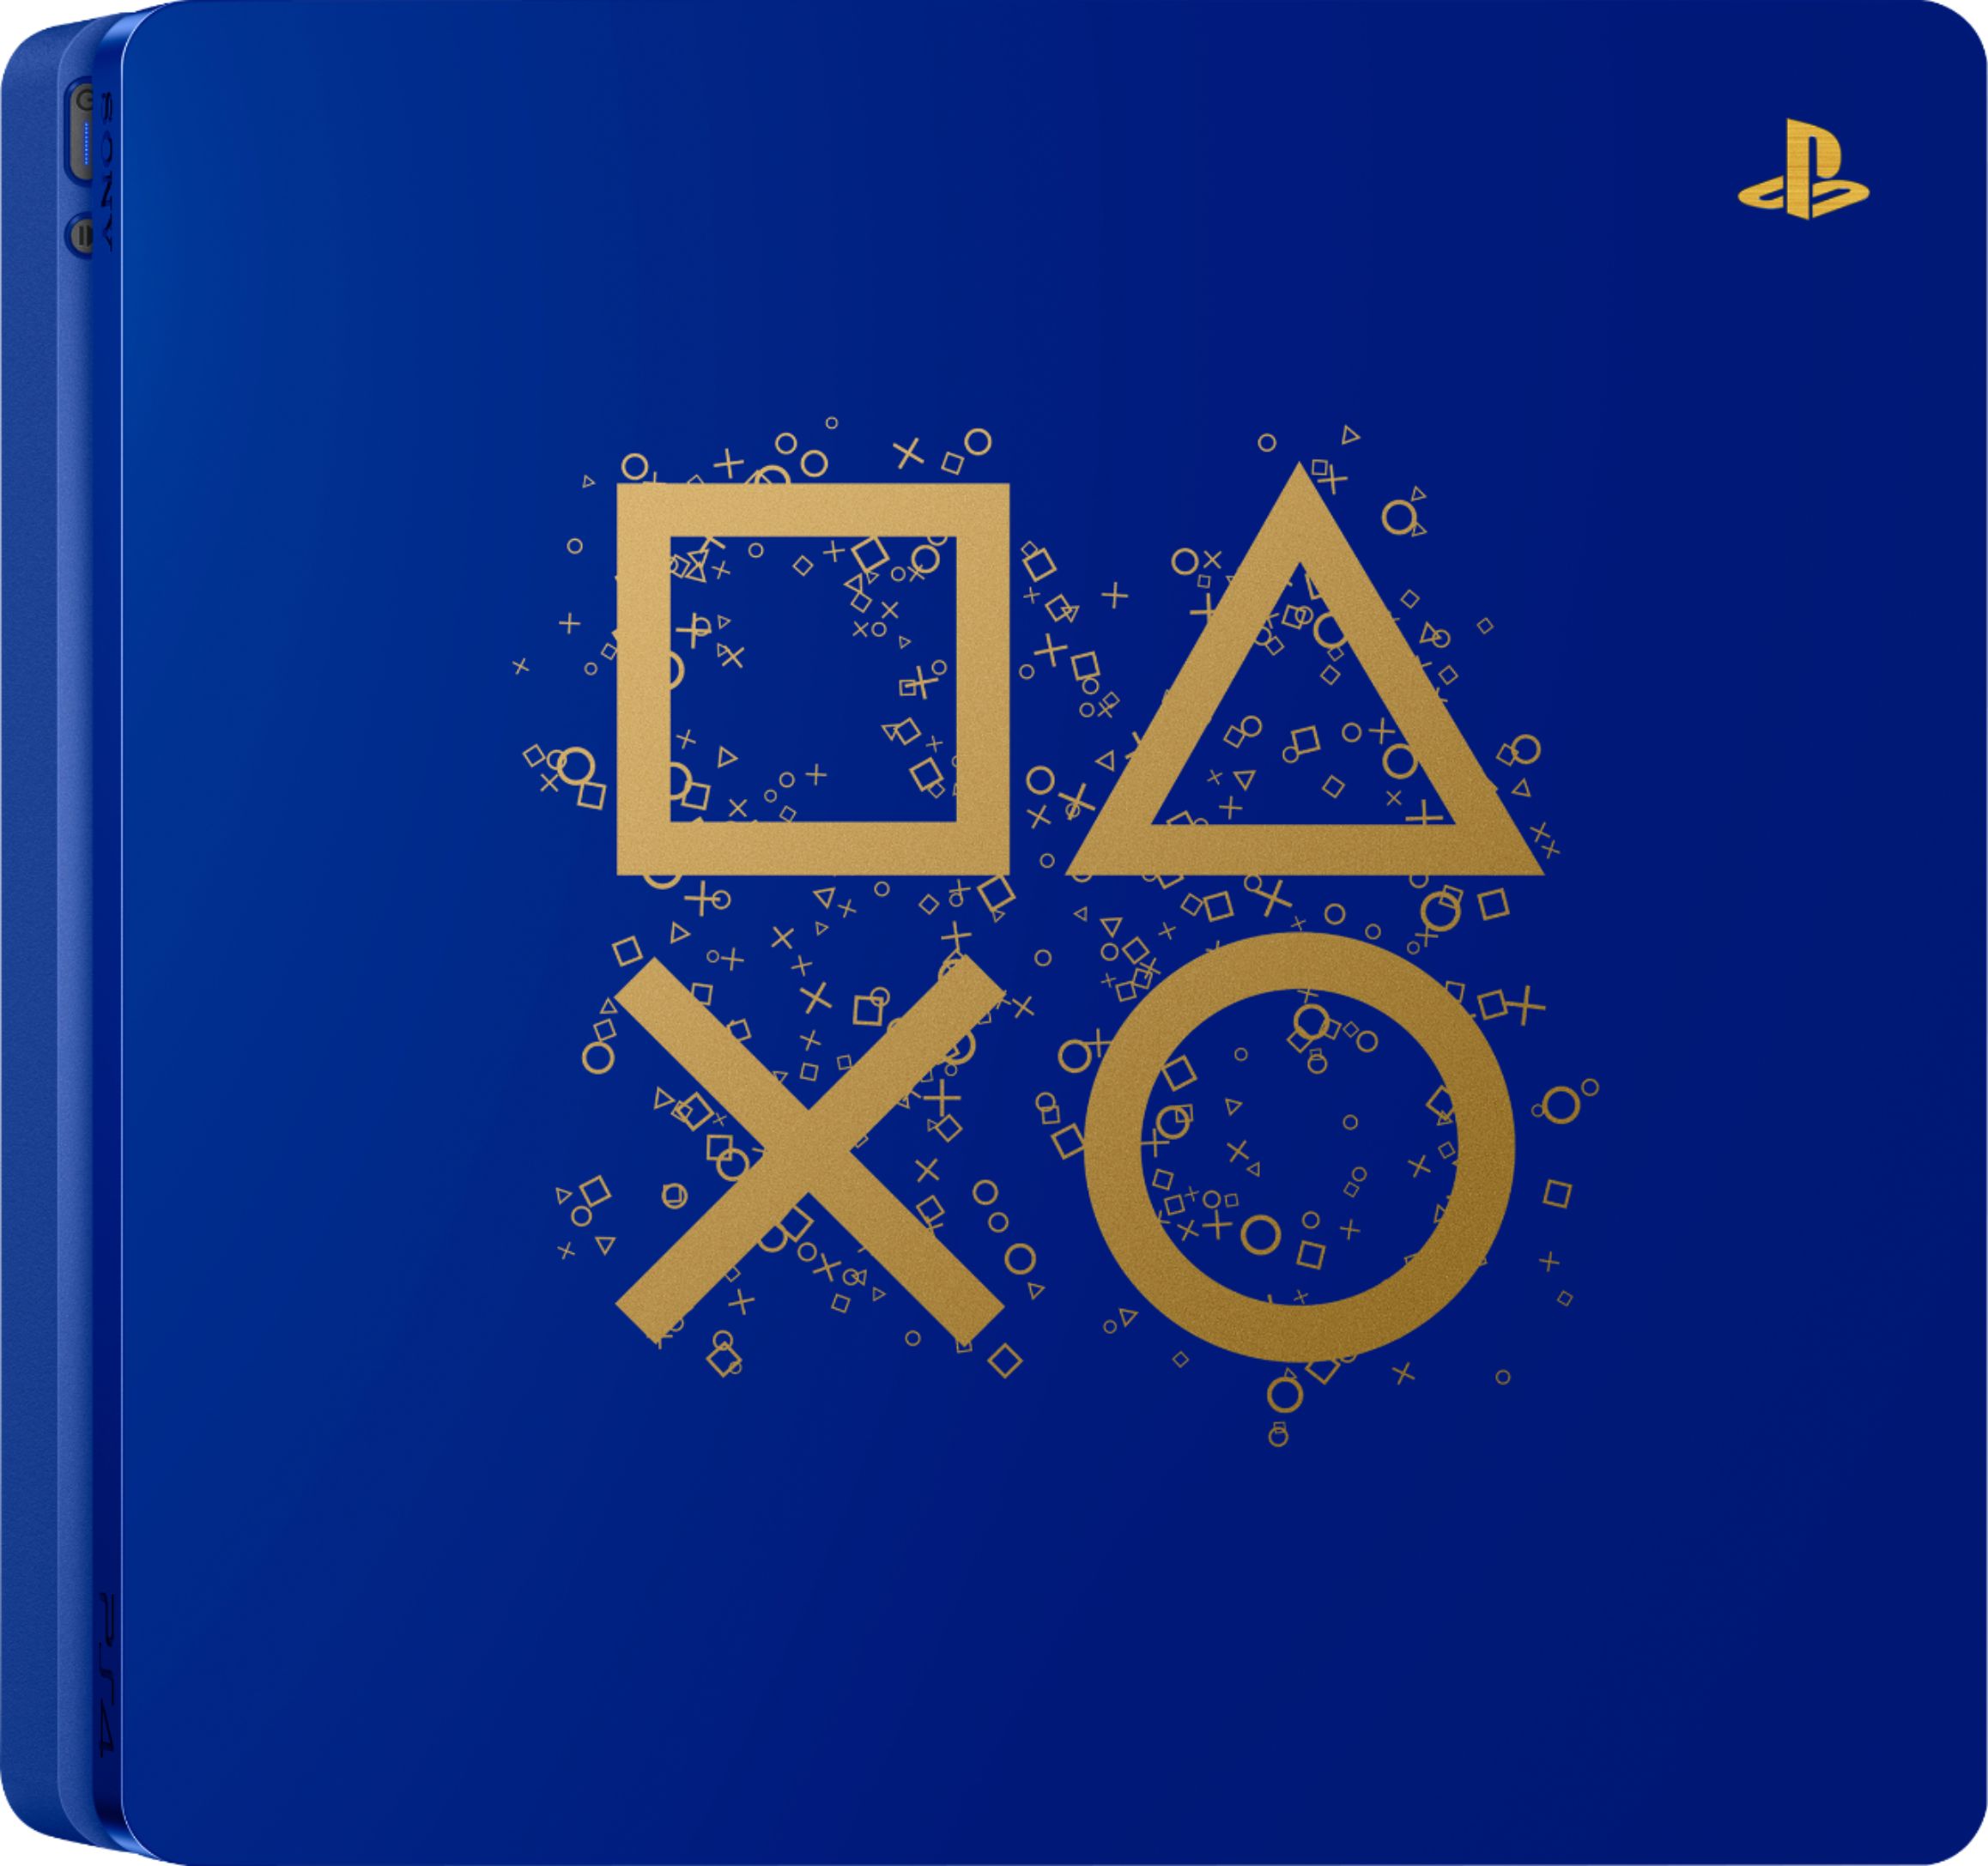 Best Buy: Sony PlayStation 4 Days of Play Limited Edition 1TB Console Steel  Black 3003979